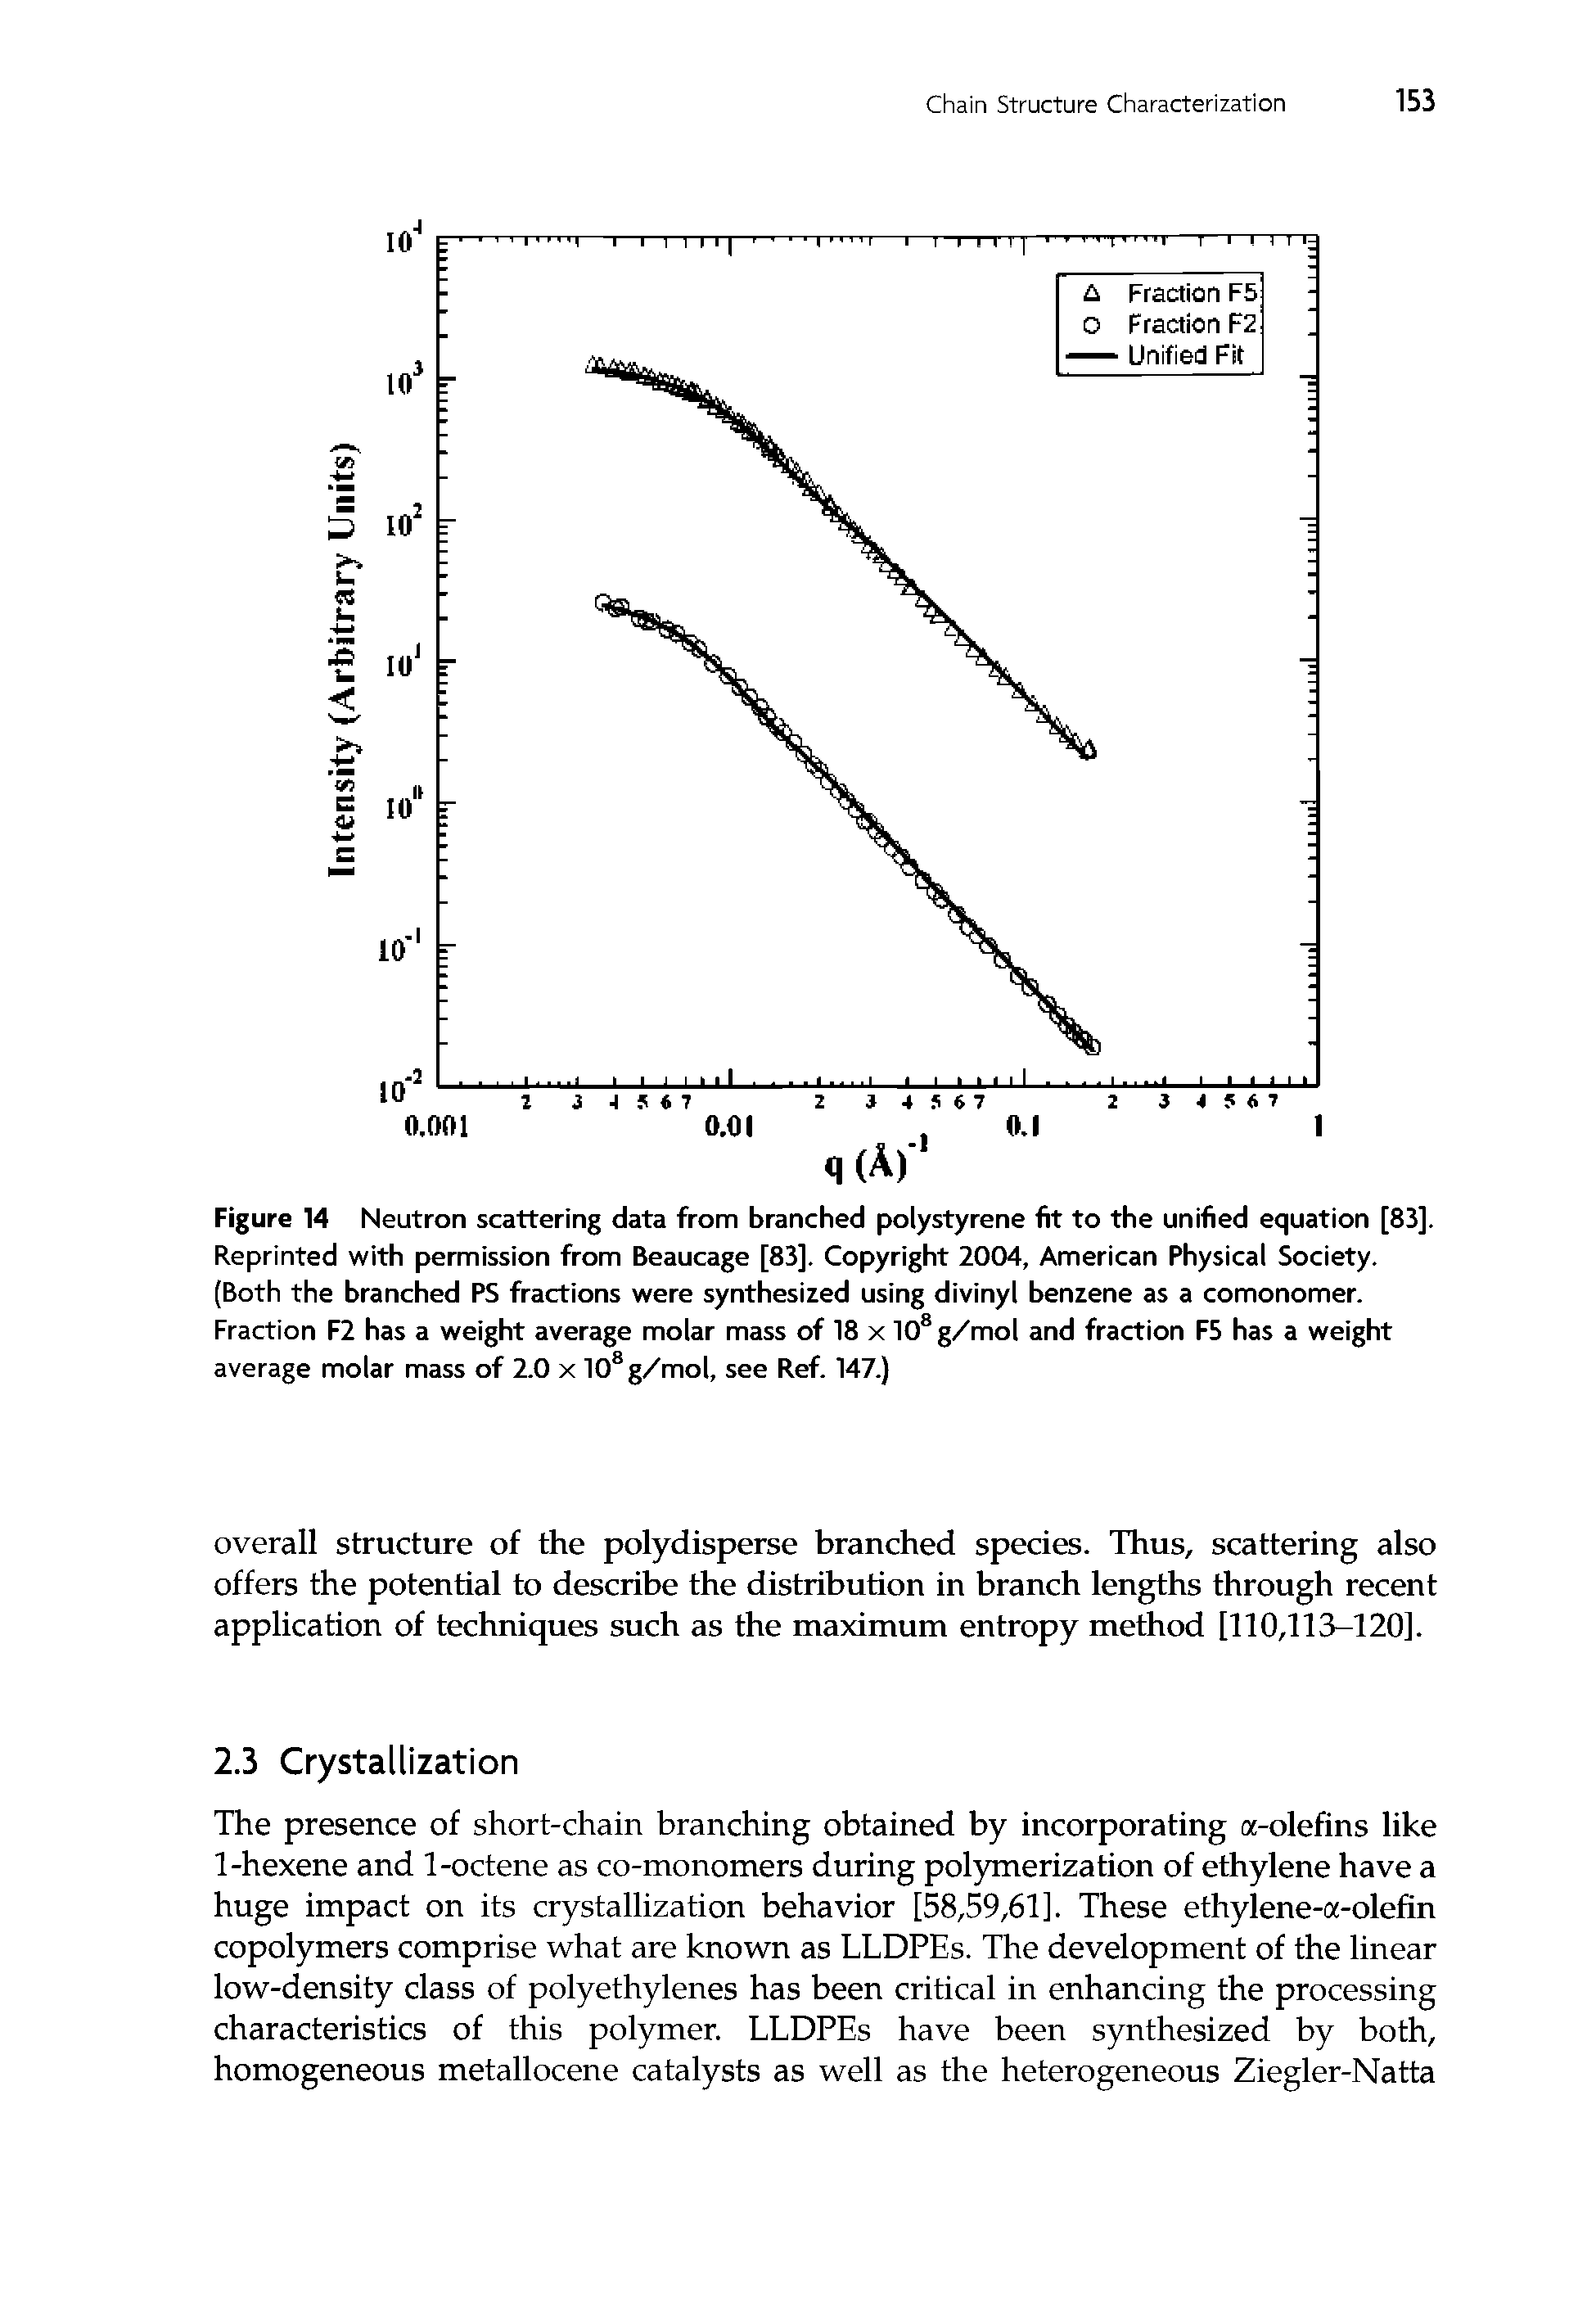 Figure 14 Neutron scattering data from branched polystyrene fit to the unified equation [83]. Reprinted with permission from Beaucage [83]. Copyright 2004, American Physical Society. (Both the branched PS fractions were synthesized using divinyl benzene as a comonomer. Fraction F2 has a weight average molar mass of 18 x 108 g/mol and fraction F5 has a weight average molar mass of 2.0 x 108 g/mol, see Ref. 147.)...